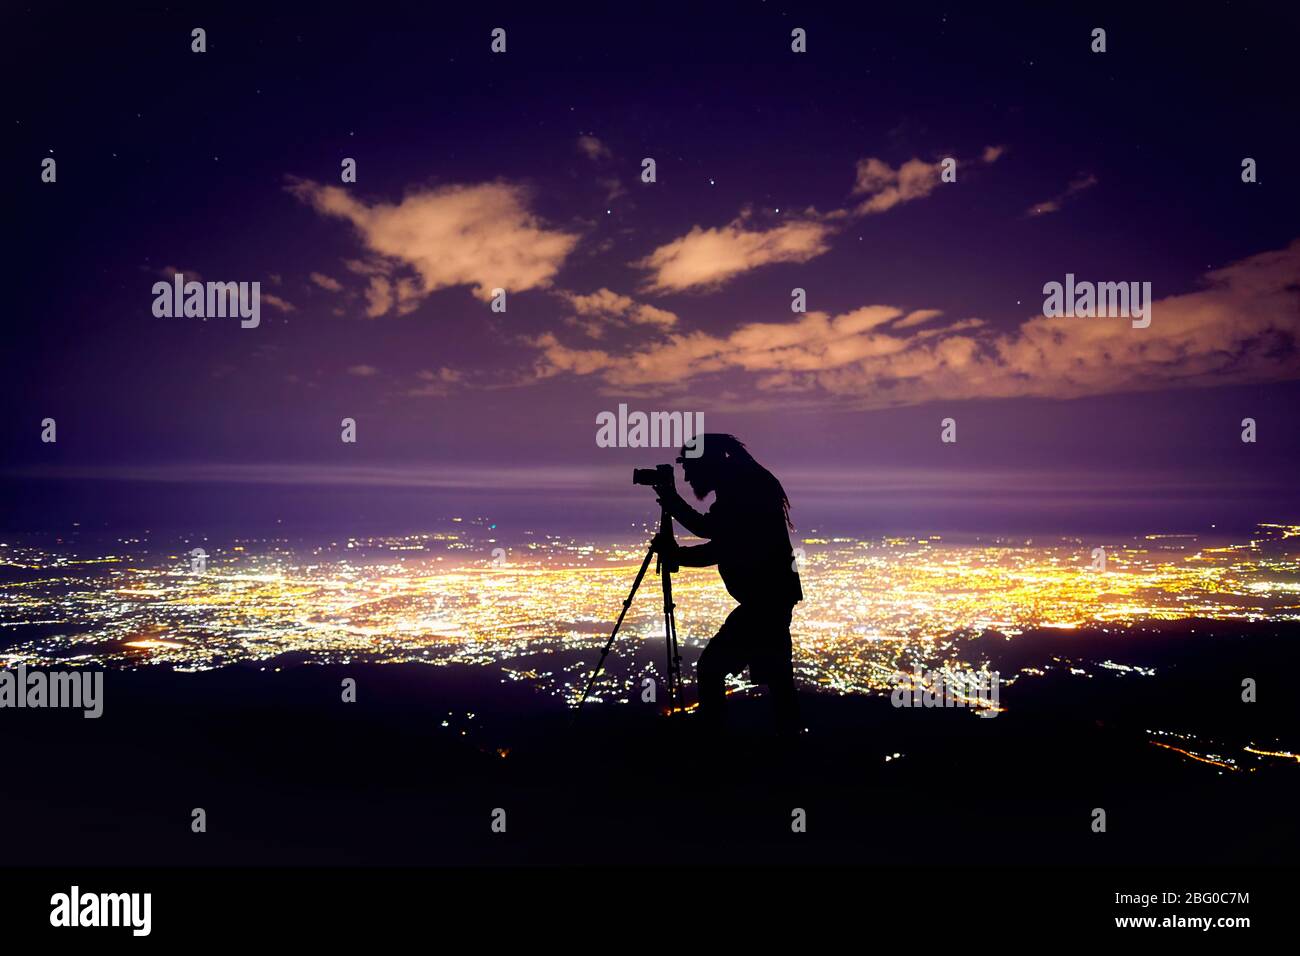 Photographer With Dreadlocks In Silhouette Taking Shot With Camera On Tripod Against Night Sky With Stars And Glowing City Light Background Stock Photo Alamy